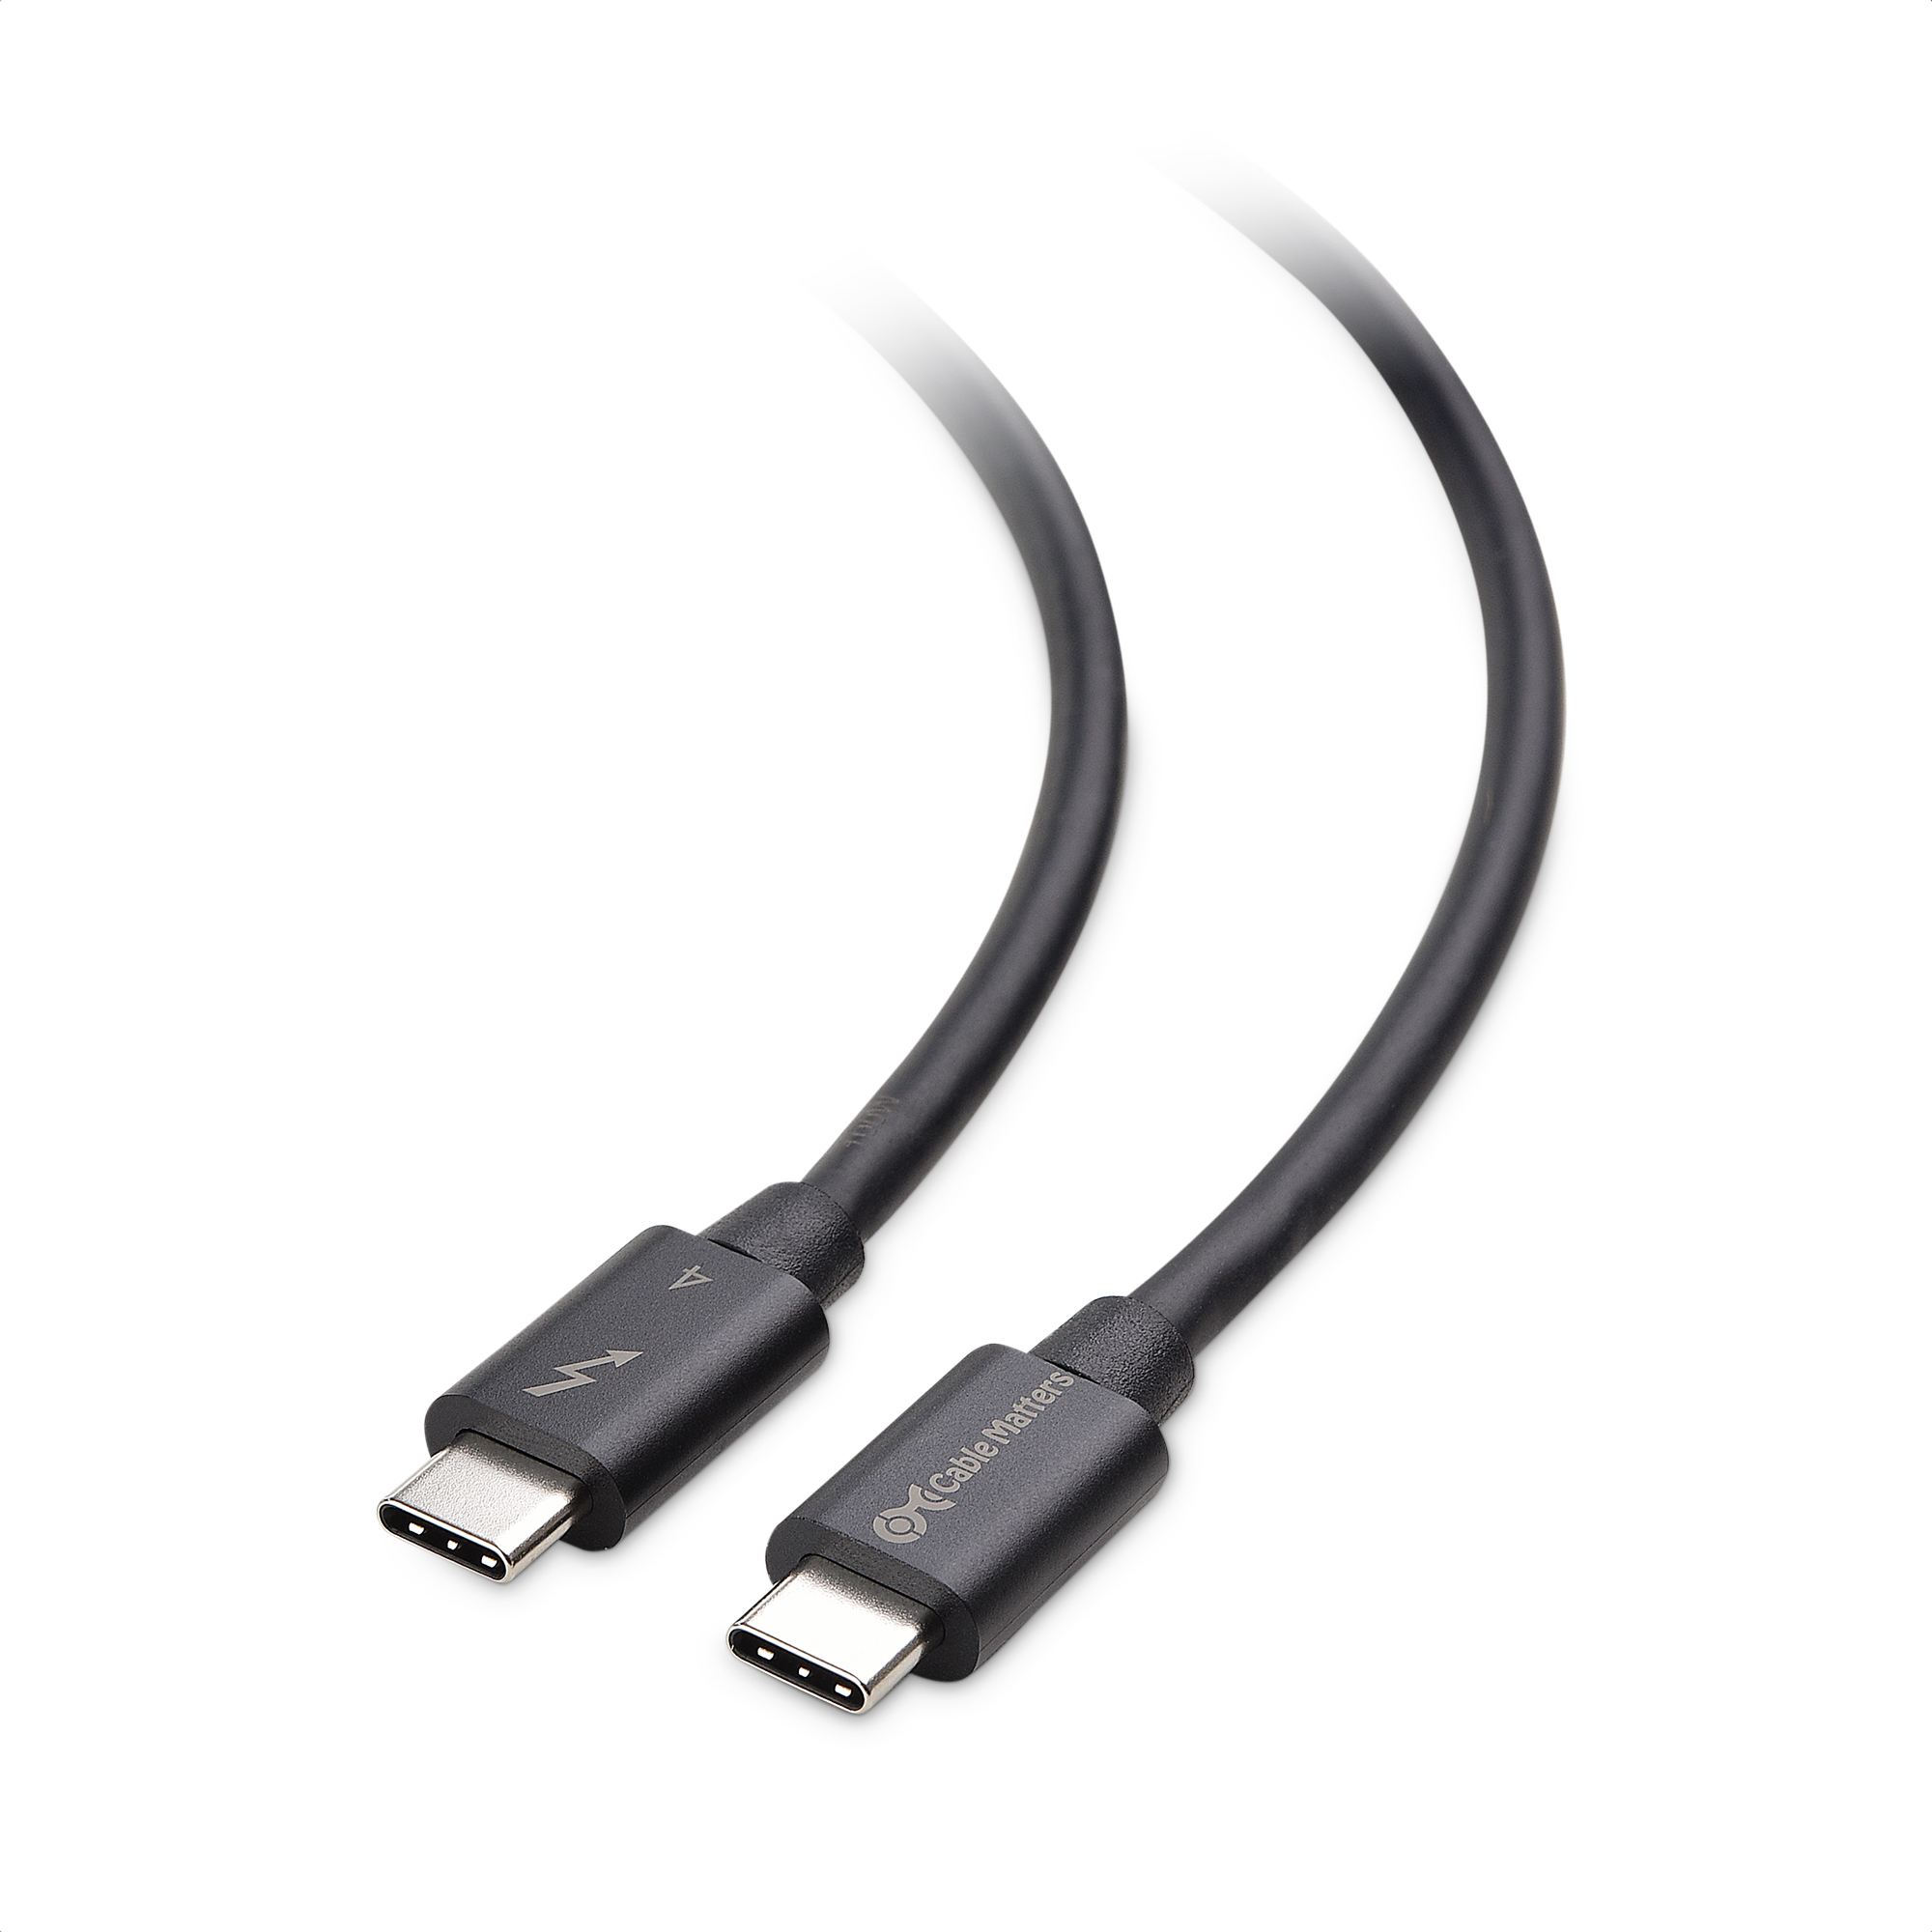 What is USB Type-C? Introduction of Type-C cable